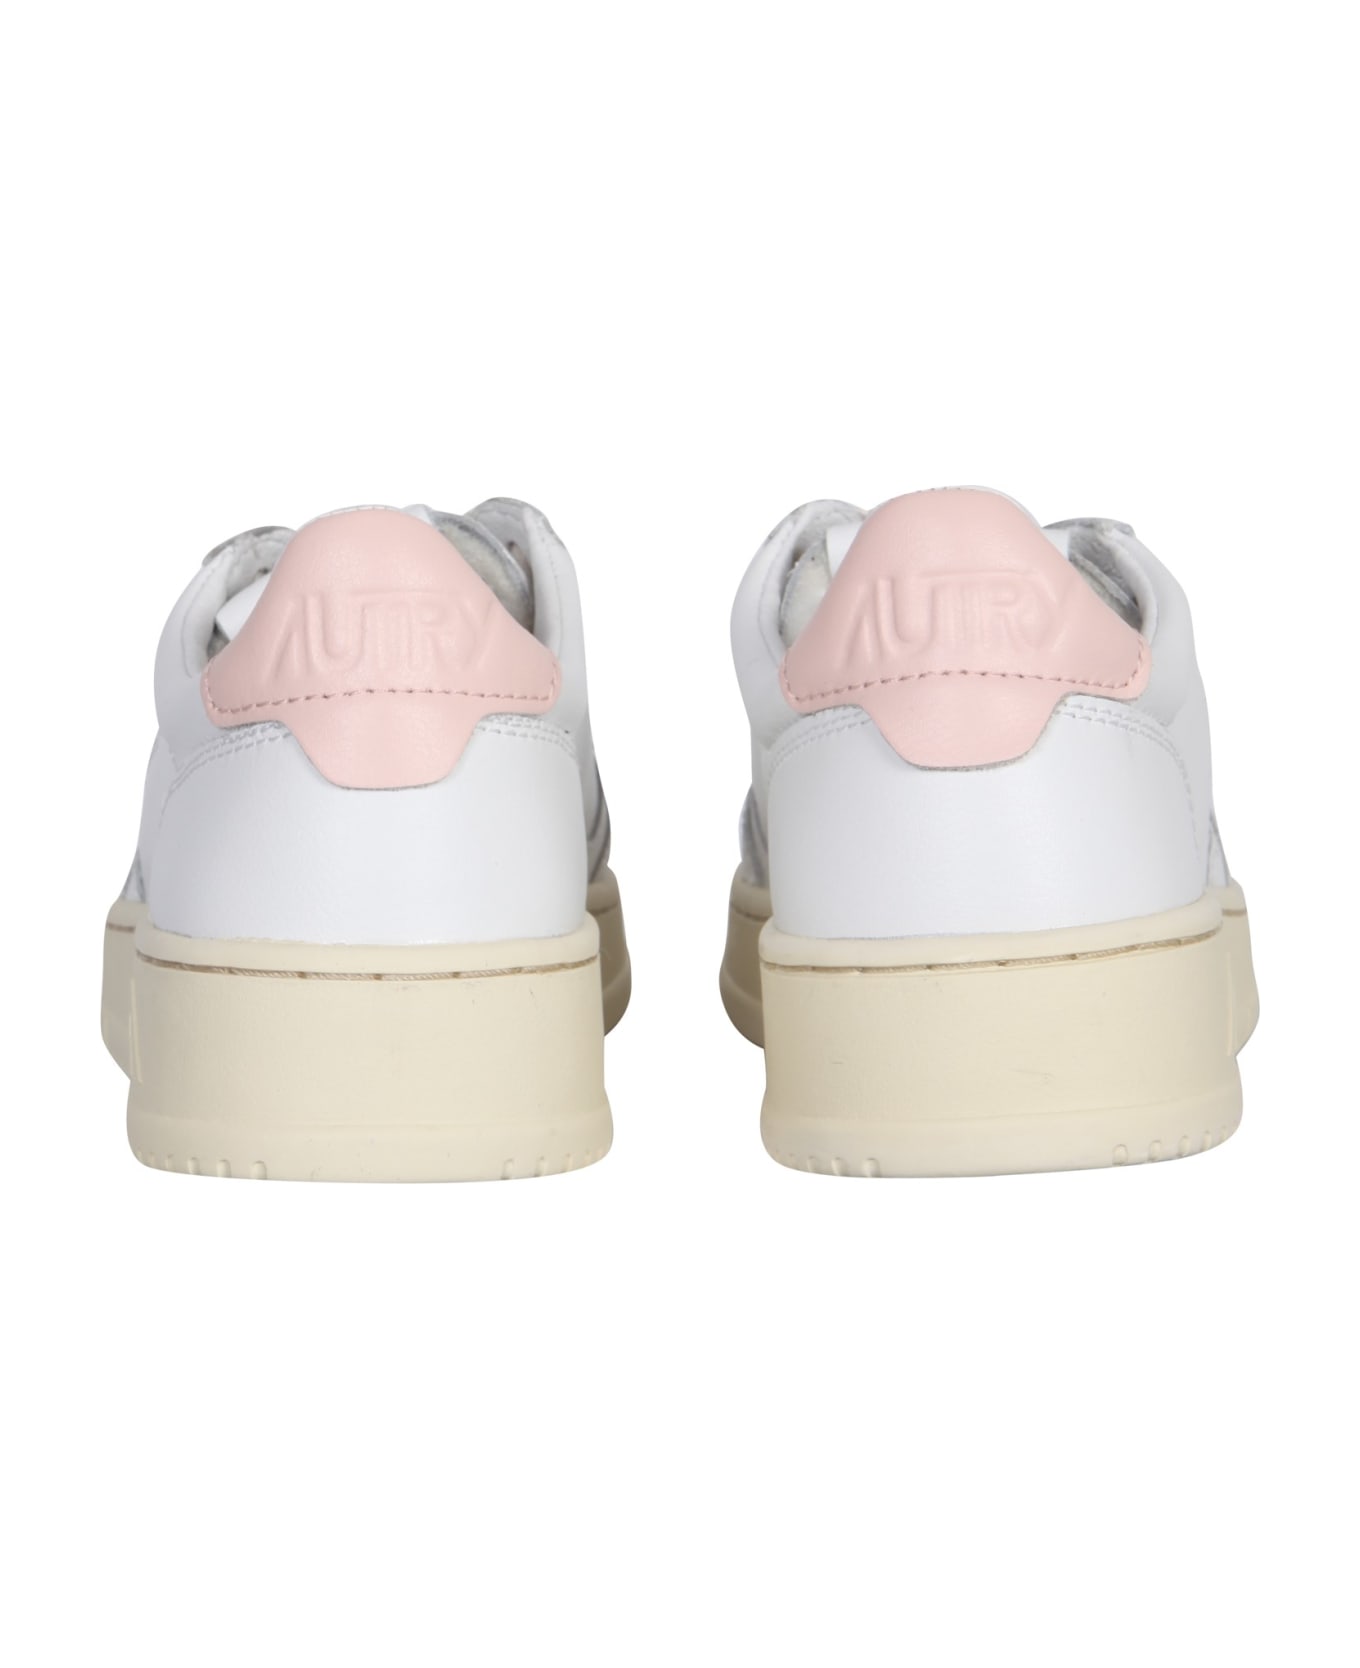 Autry Leather Sneakers - PINK/WHITE スニーカー